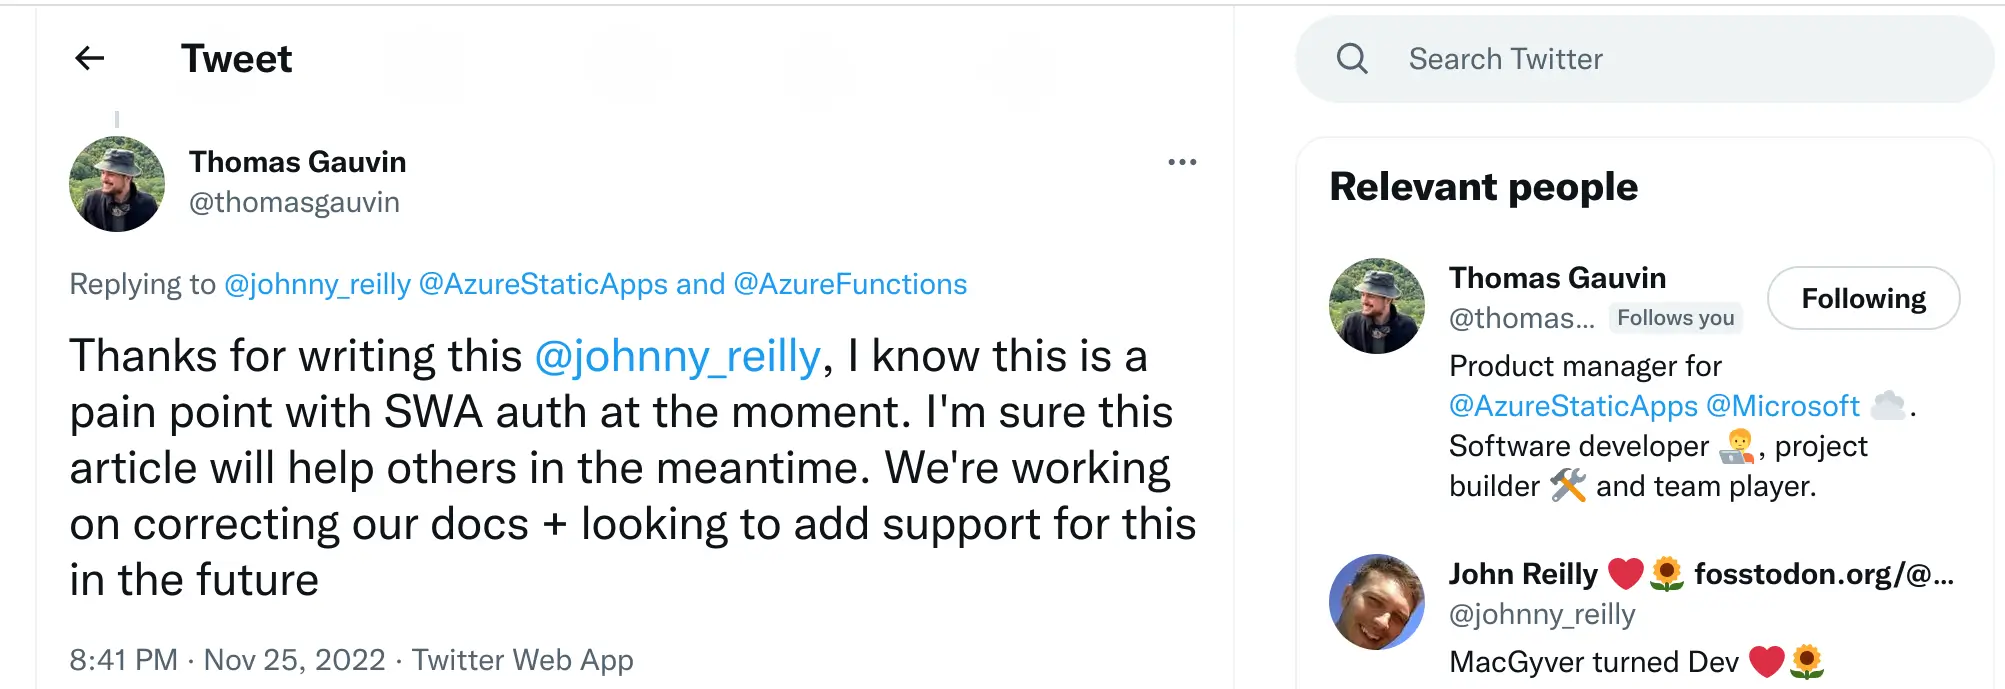 screenshot of tweet from Thomas Gauvin saying &quot;Thanks for writing this @johnny_reilly, I know this is a pain point with SWA auth at the moment. I&#39;m sure this article will help others in the meantime. We&#39;re working on correcting our docs + looking to add support for this in the future&quot;